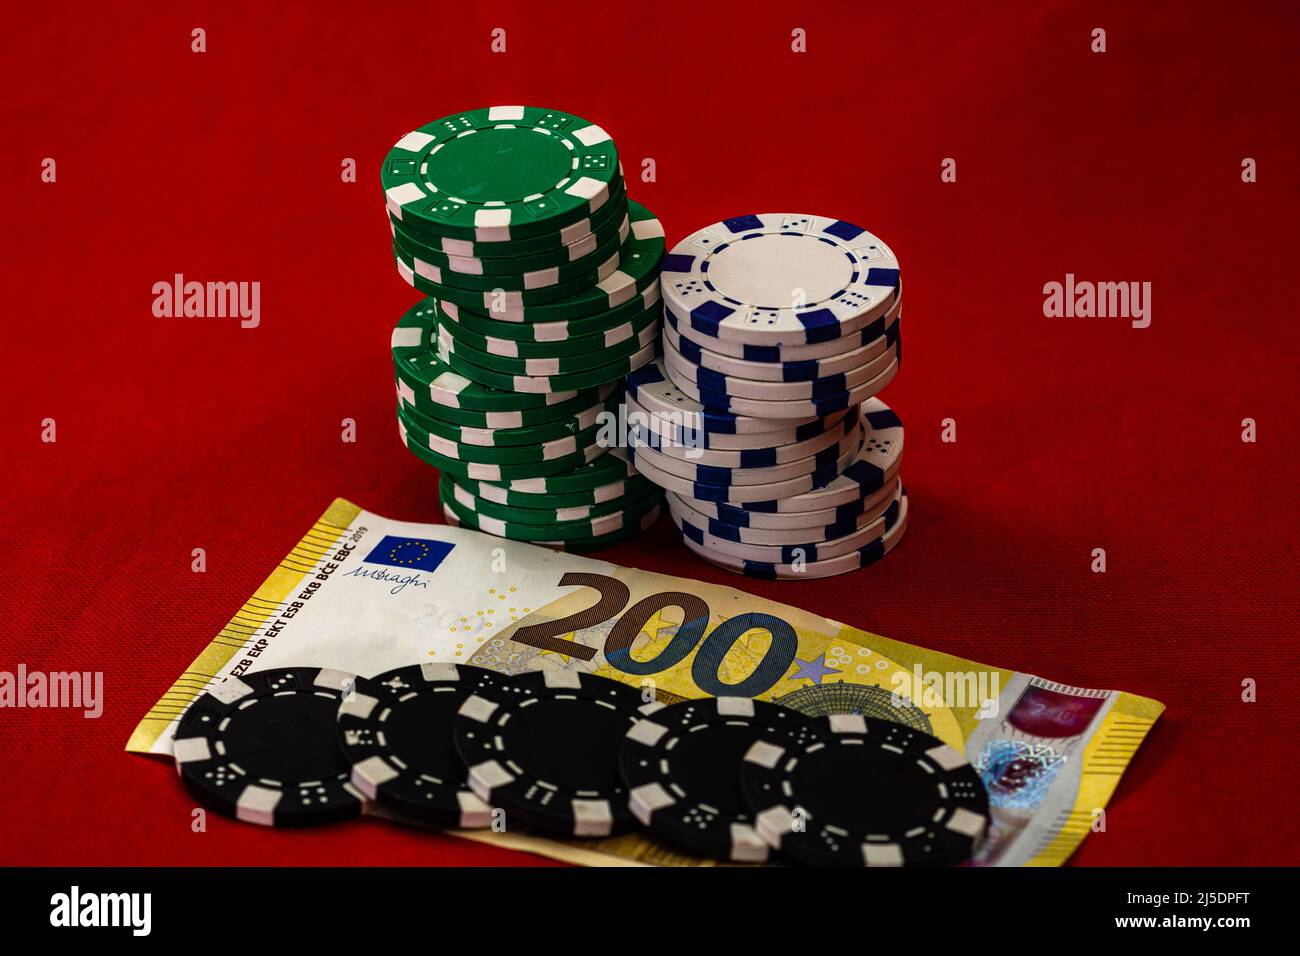 Stacks of poker chips with money on background, EURO currency Stock Photo